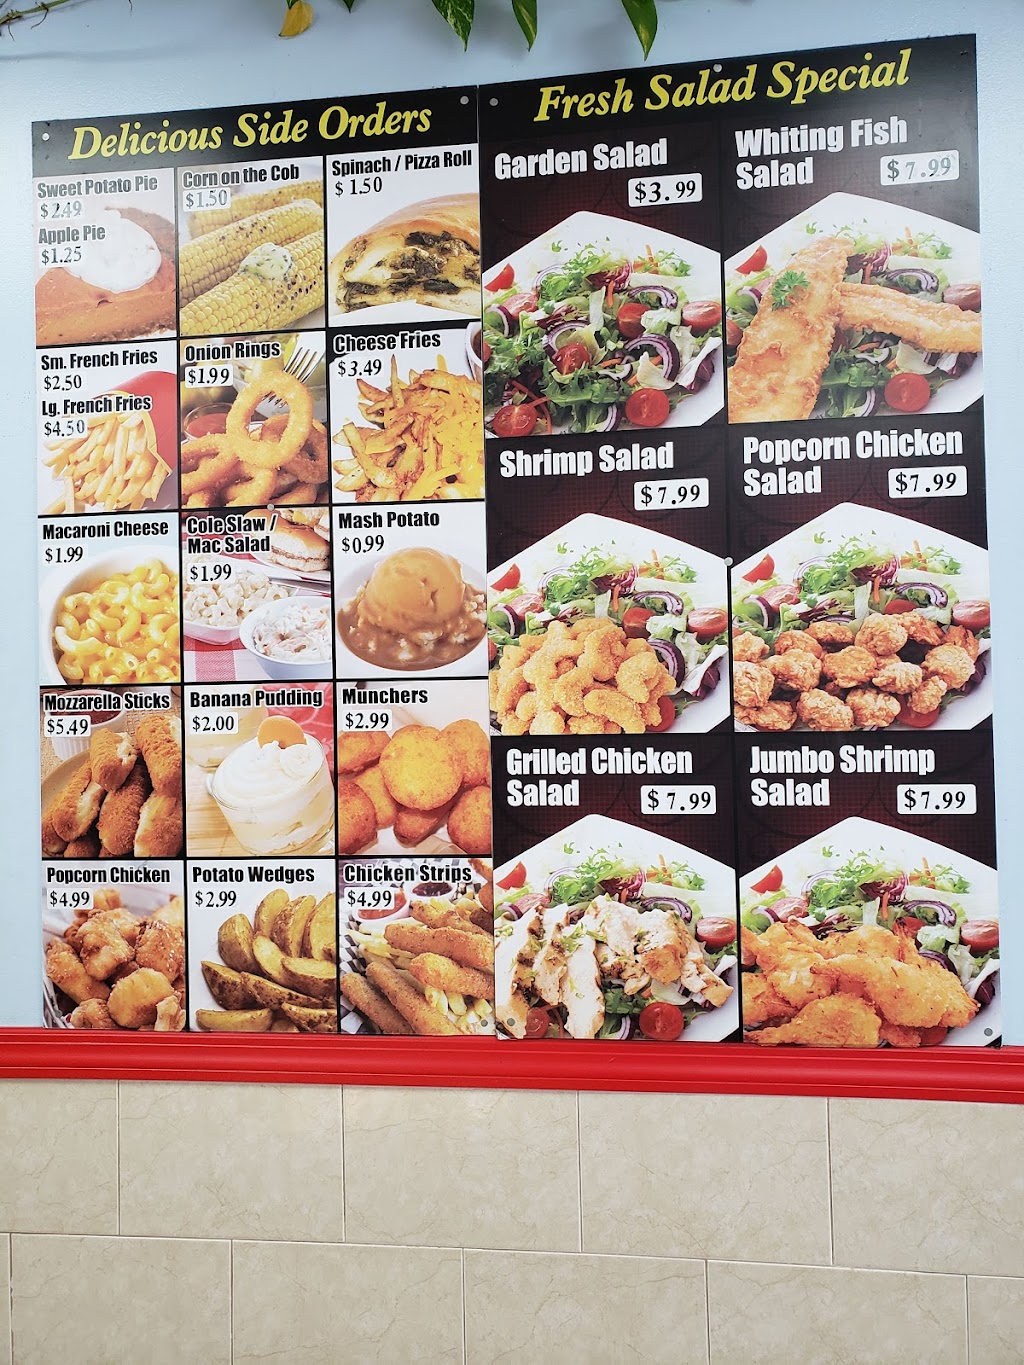 Crown Fried Chicken and grill | 418 E Main St, Bound Brook, NJ 08805 | Phone: (732) 302-0900